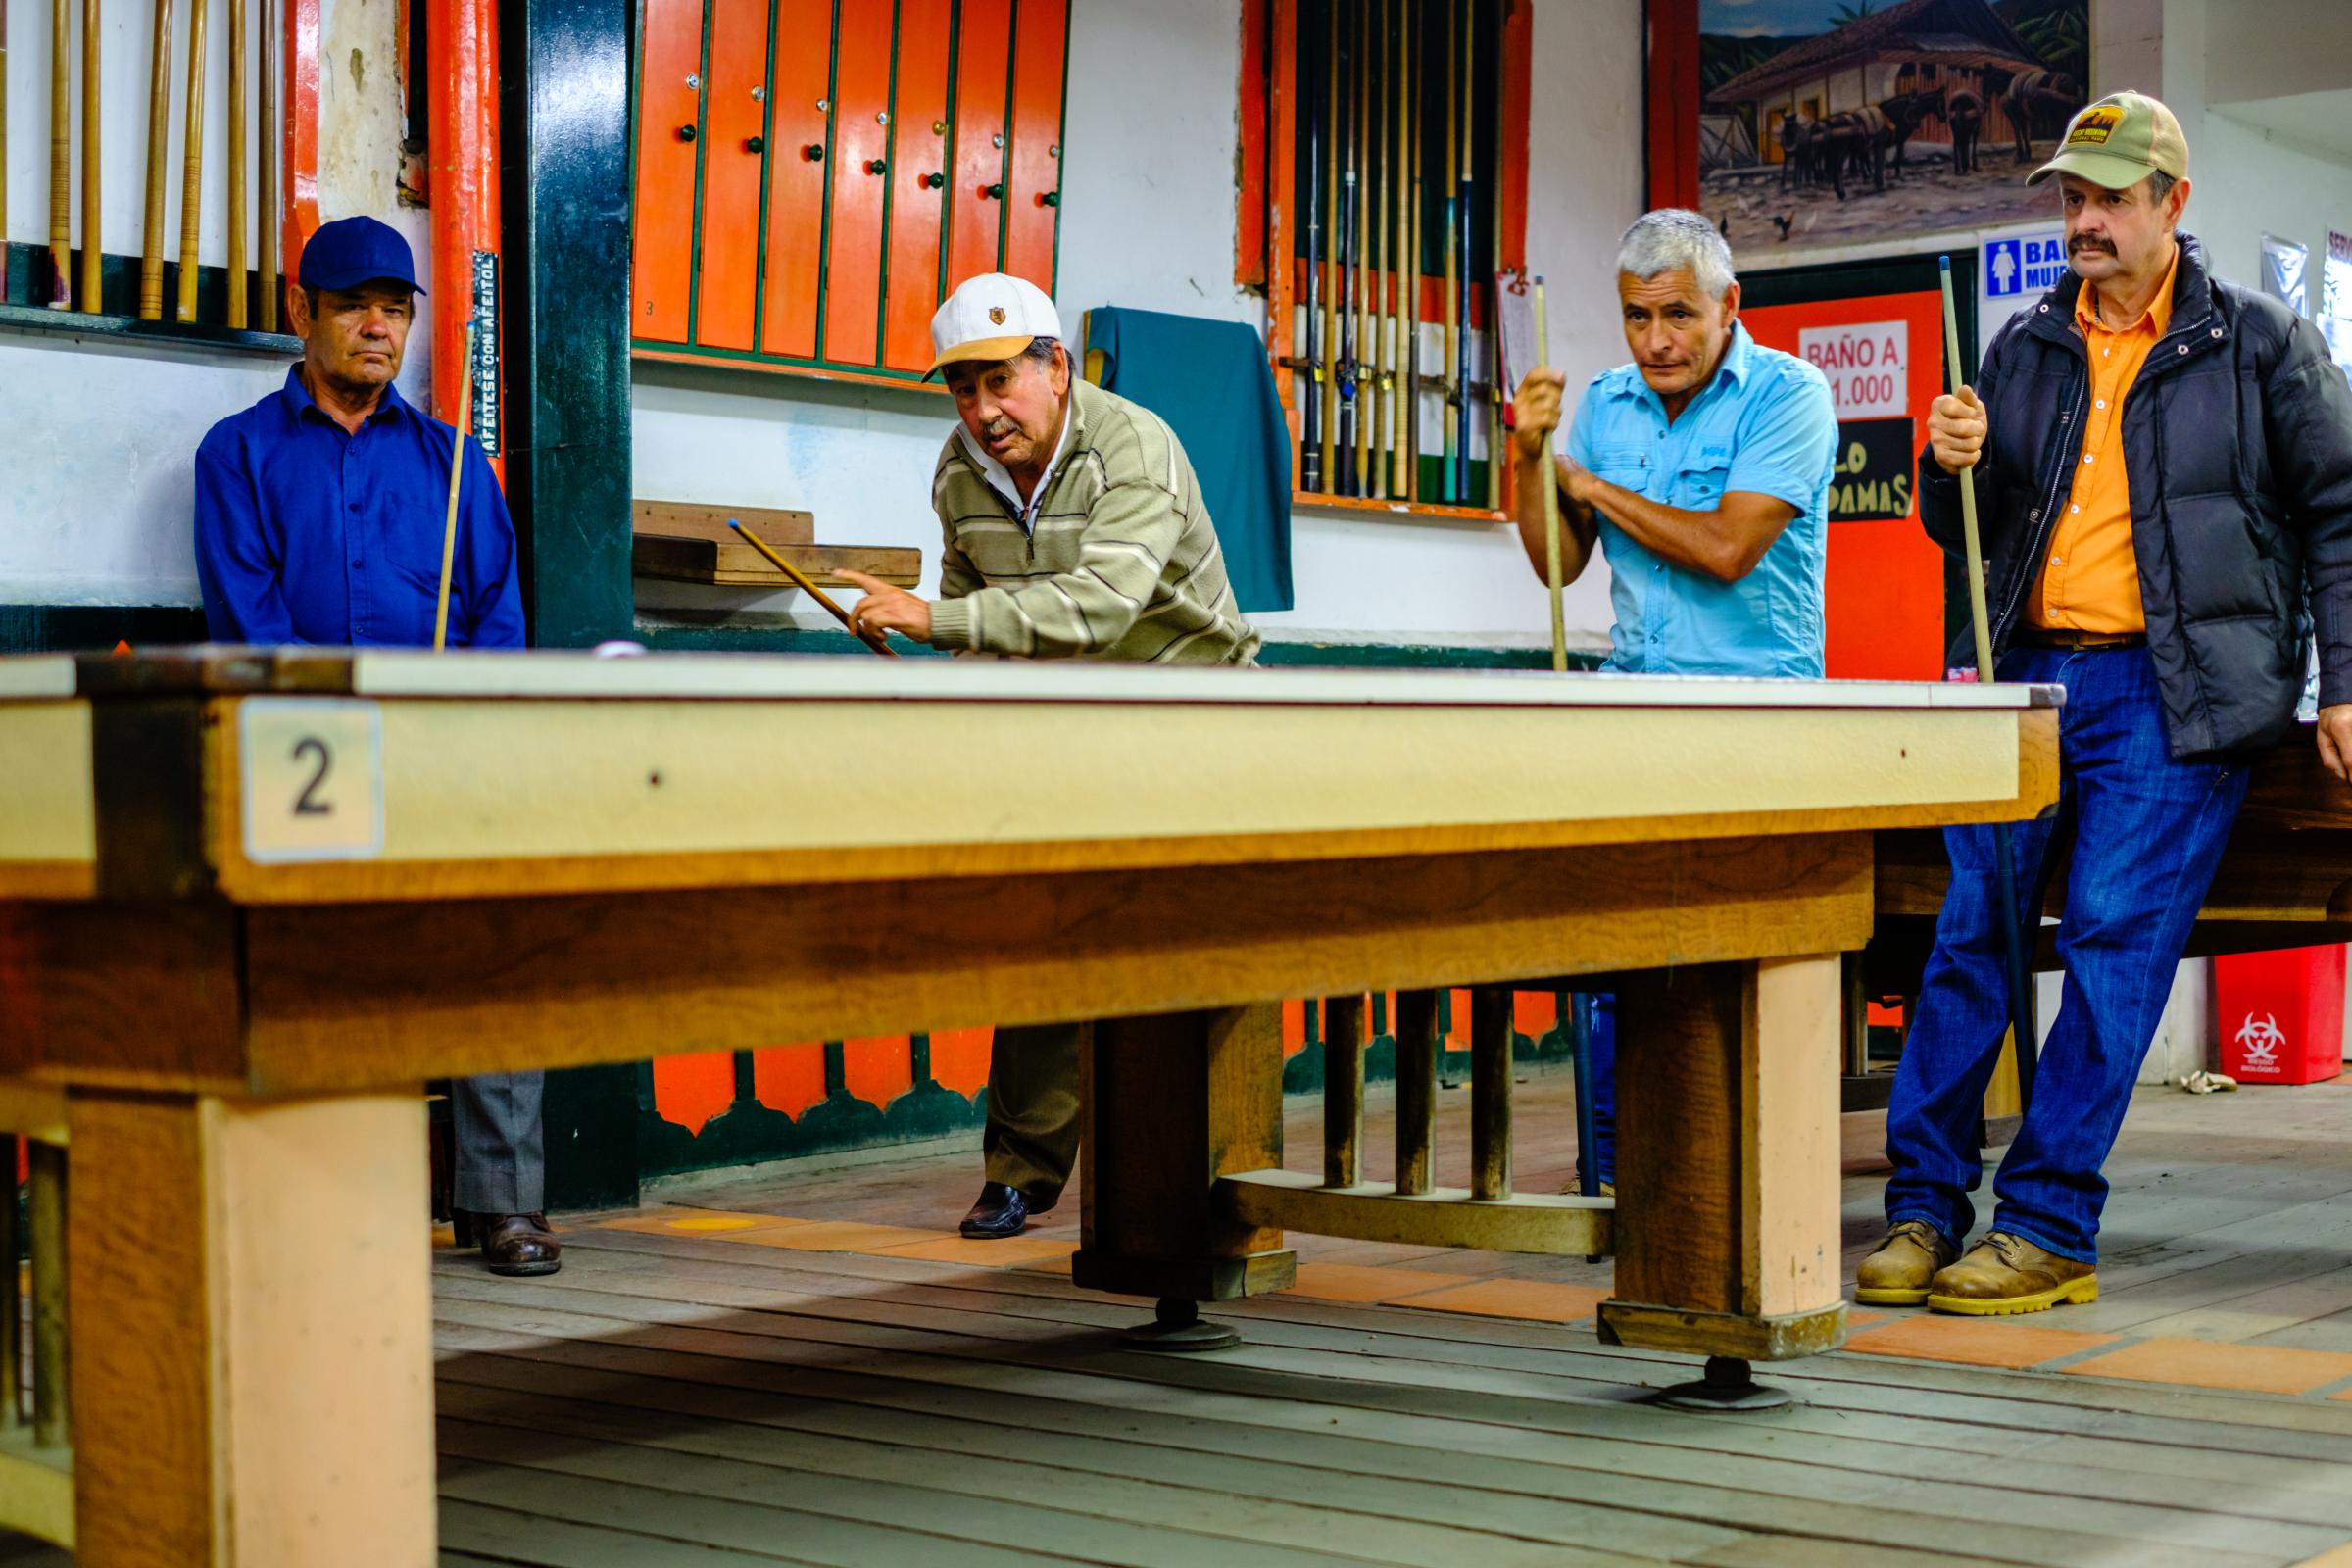 Eje Cafetero Colombia - Local population gather around pool tables, at Bar...